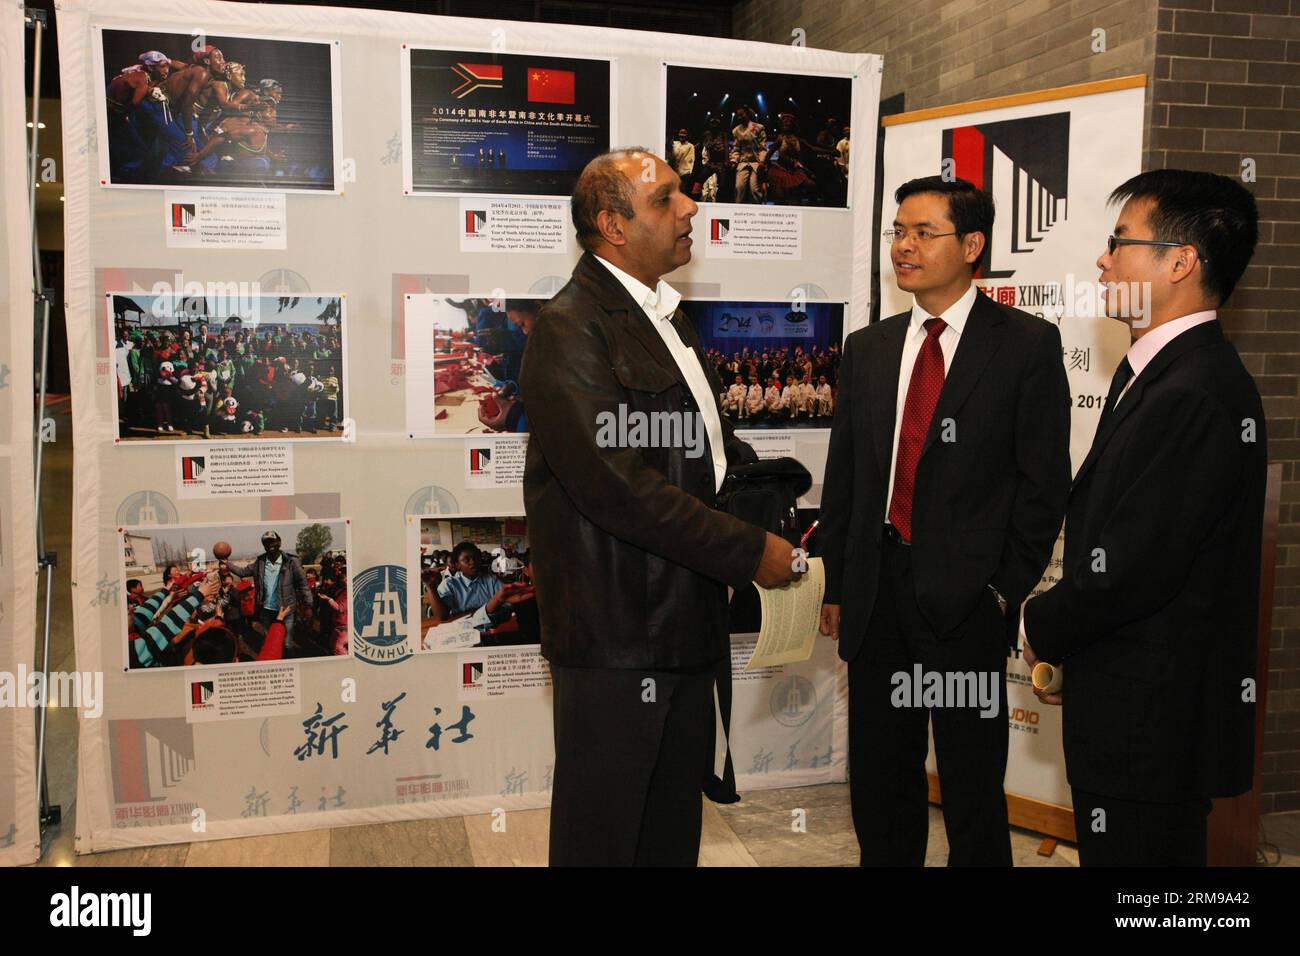 (140514) -- PRETORIA, May 14, 2014 (Xinhua) -- A South African journalist (L) talks with exhibition organizers during the Xinhua Gallery Exhibition held at the Chinese Embassy in South Africa in Pretoria, South Africa, May 14, 2014. The photos on display shows the memorable moments of China-South Africa relations since 2013 and Chinese Premier Li Keqiang s African tour to Ethiopia, Nigeria, Angola, Kenya and the African Union this May. (Xinhua/Li Jing) SOUTH AFRICA-PRETORIA-XINHUA GALLERY EXHIBITION PUBLICATIONxNOTxINxCHN   Pretoria May 14 2014 XINHUA a South African Journalist l Talks With Ex Stock Photo